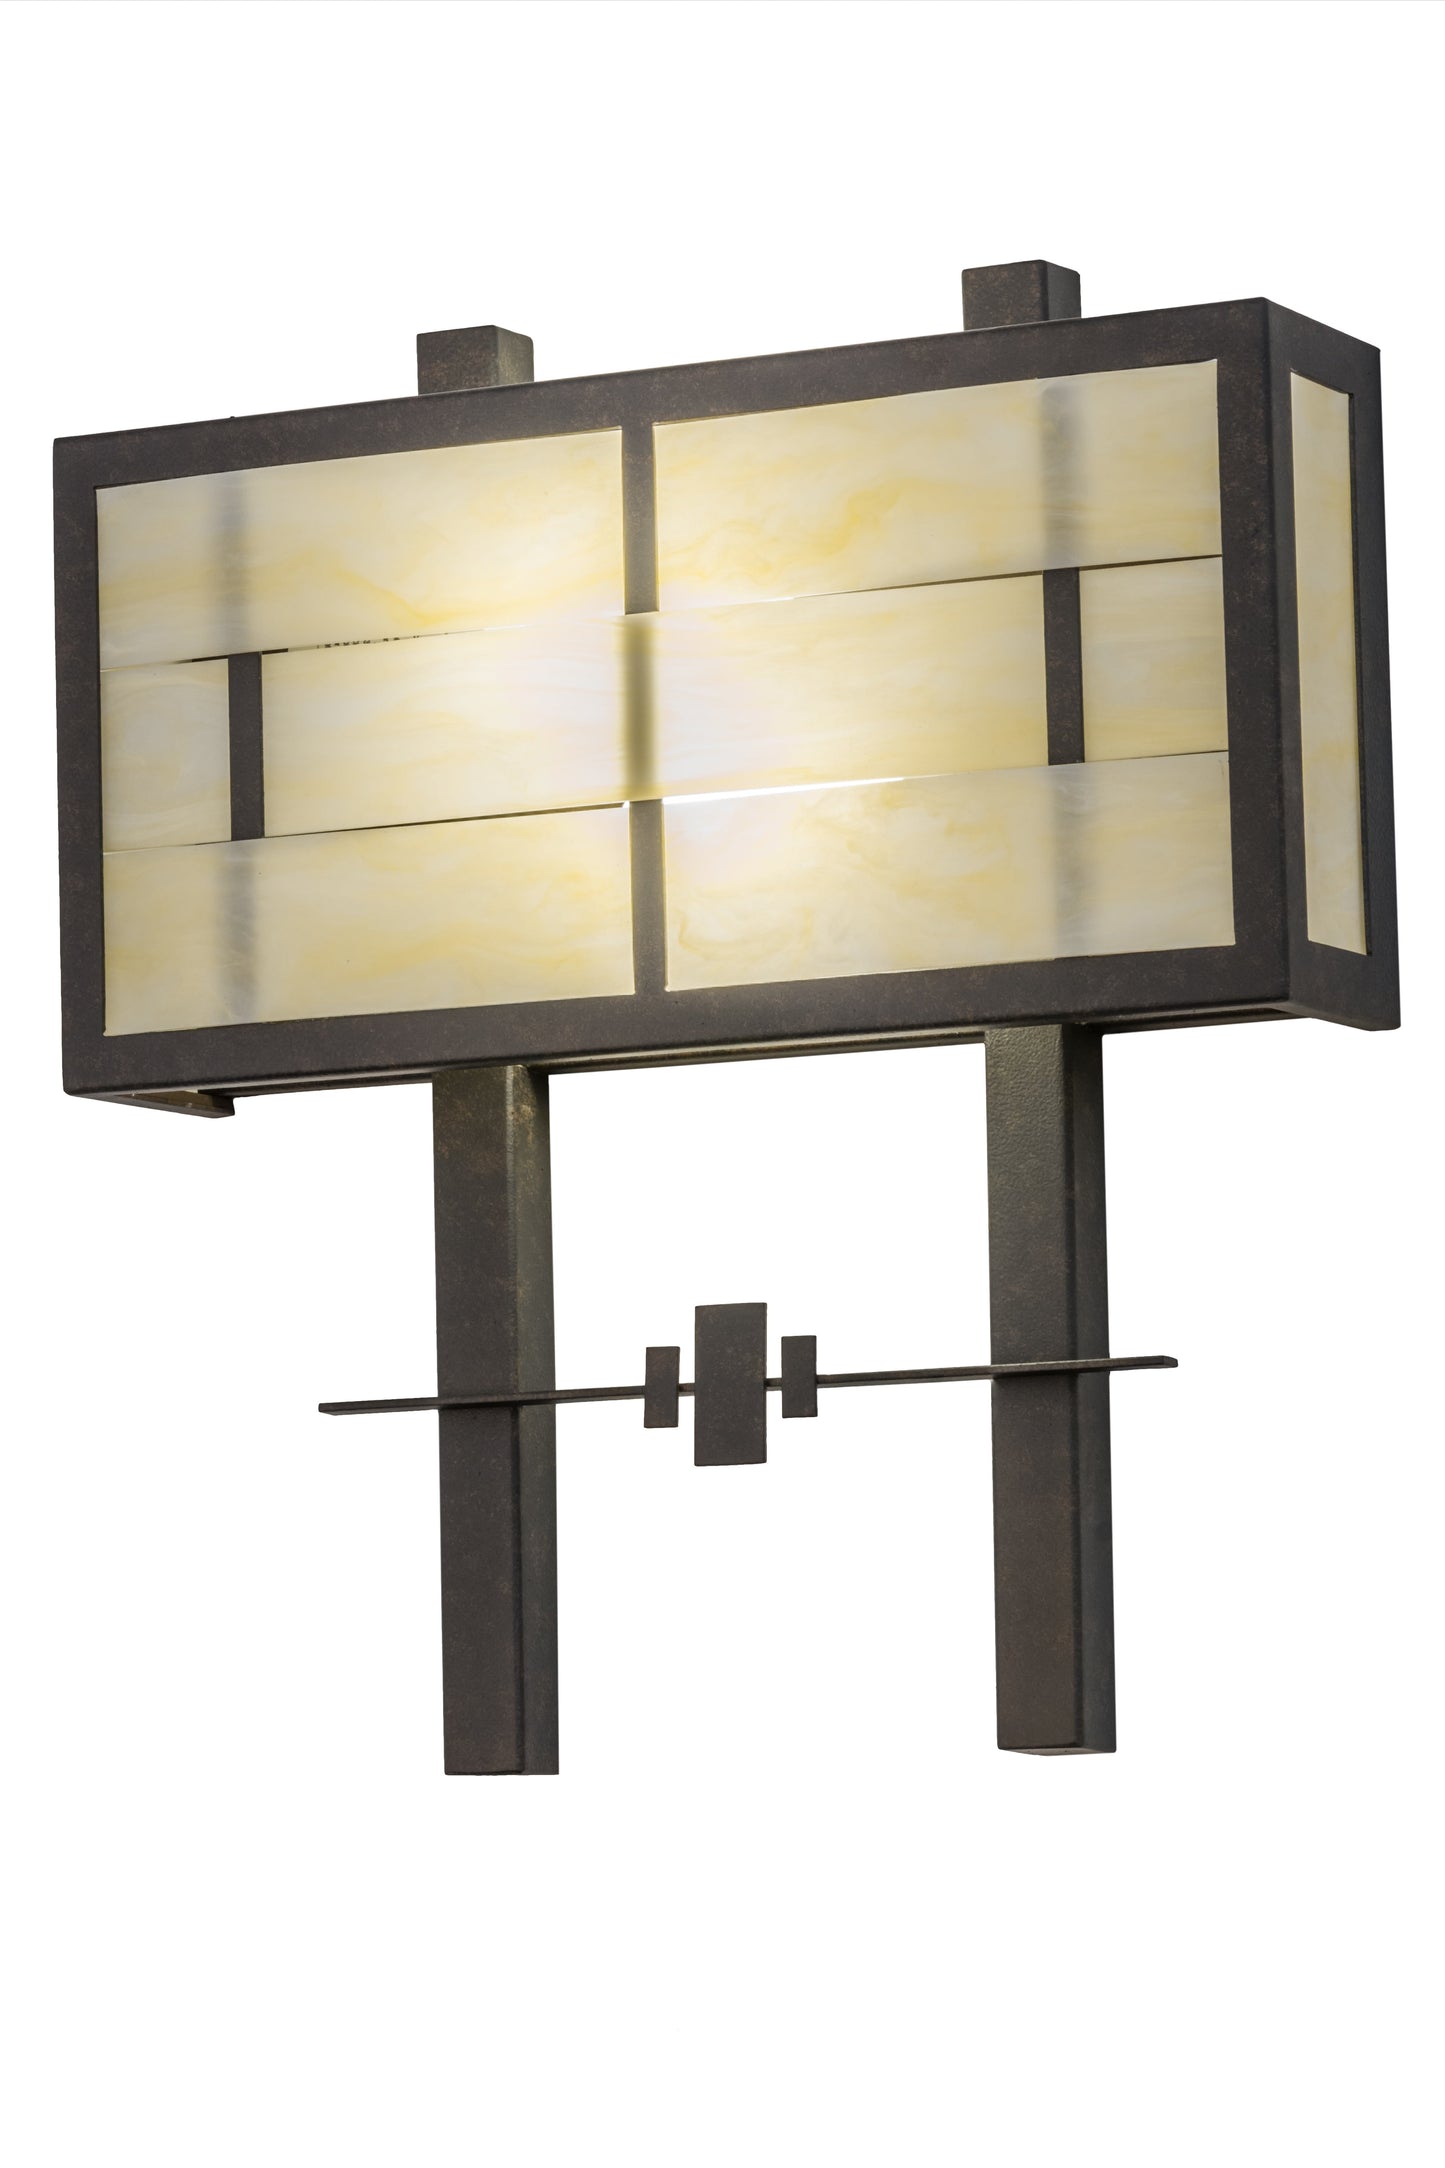 18" Weaved Idalight Wall Sconce by 2nd Ave Lighting